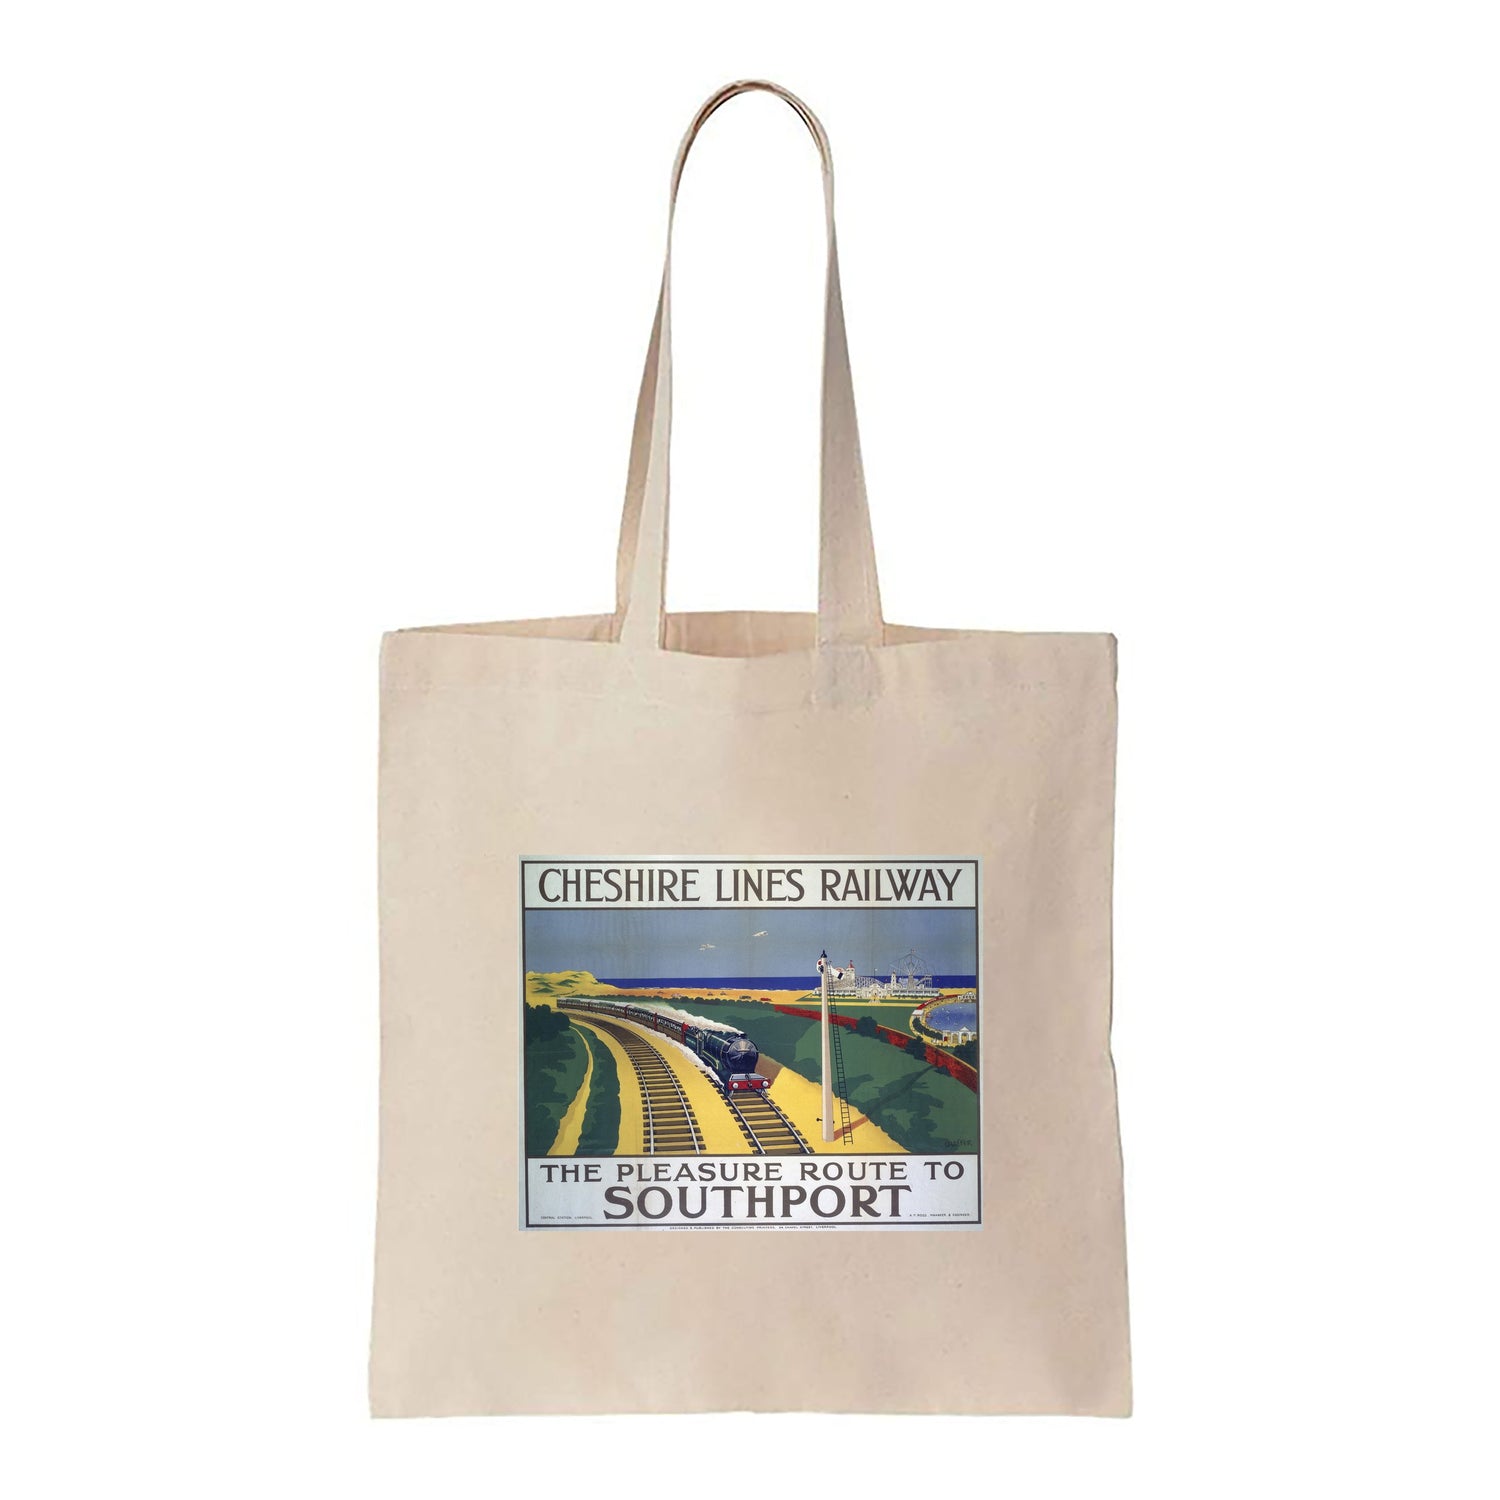 Cheshire Lines Railway to Southport - Canvas Tote Bag